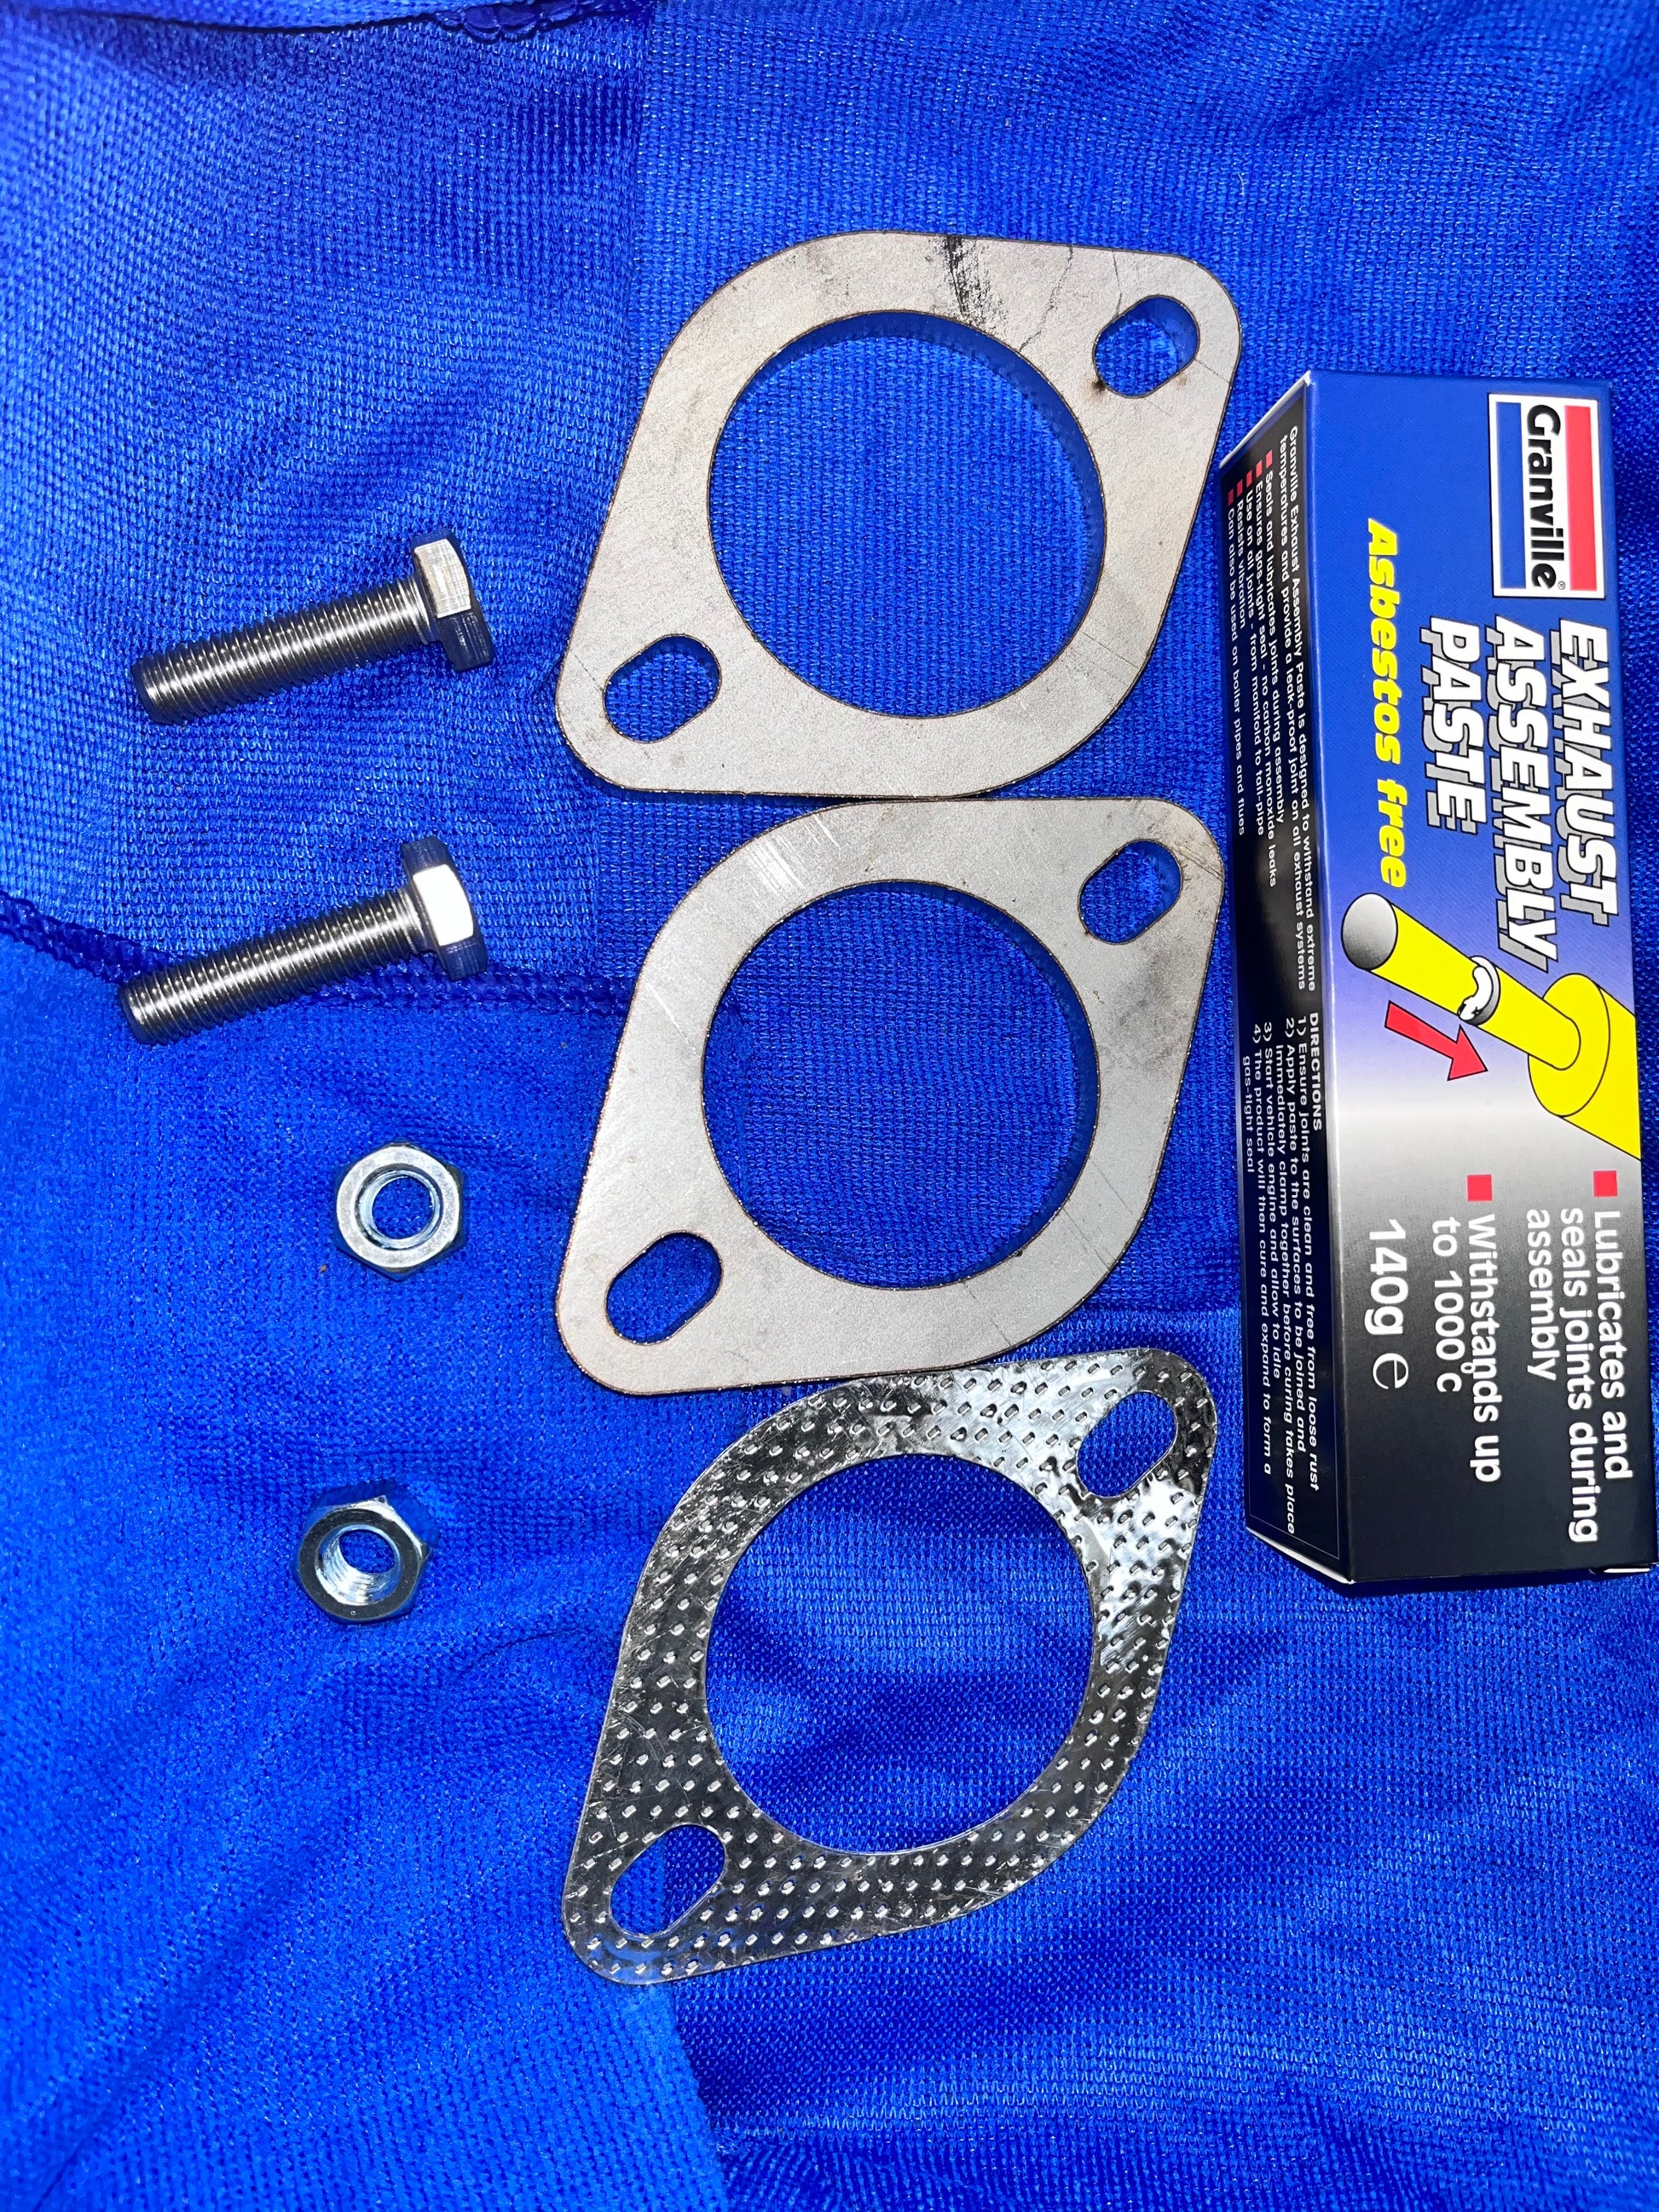 Stainless Steel 2" Exhaust Flange and Gasket Kit with Exhaust Sealant Paste - Pipe Dynamics